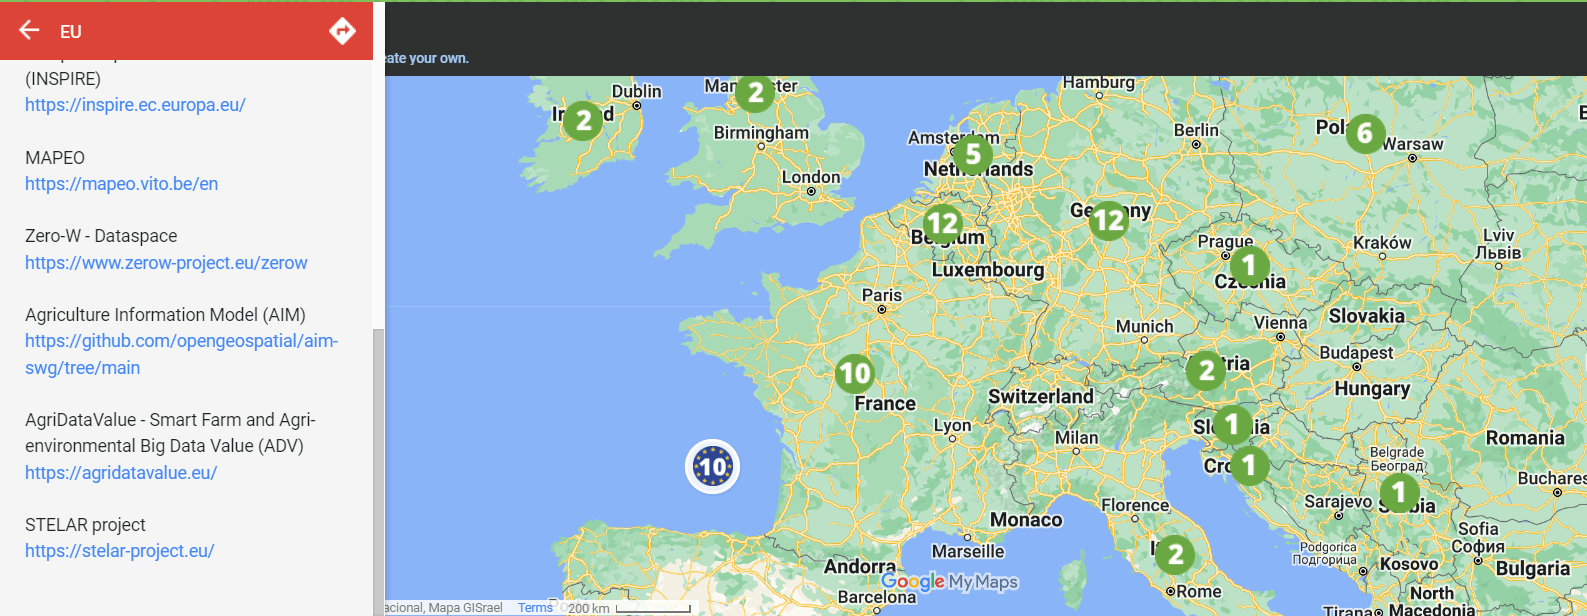 Screenshot of the Data Sharing Initiatives map containing STELAR and its web address